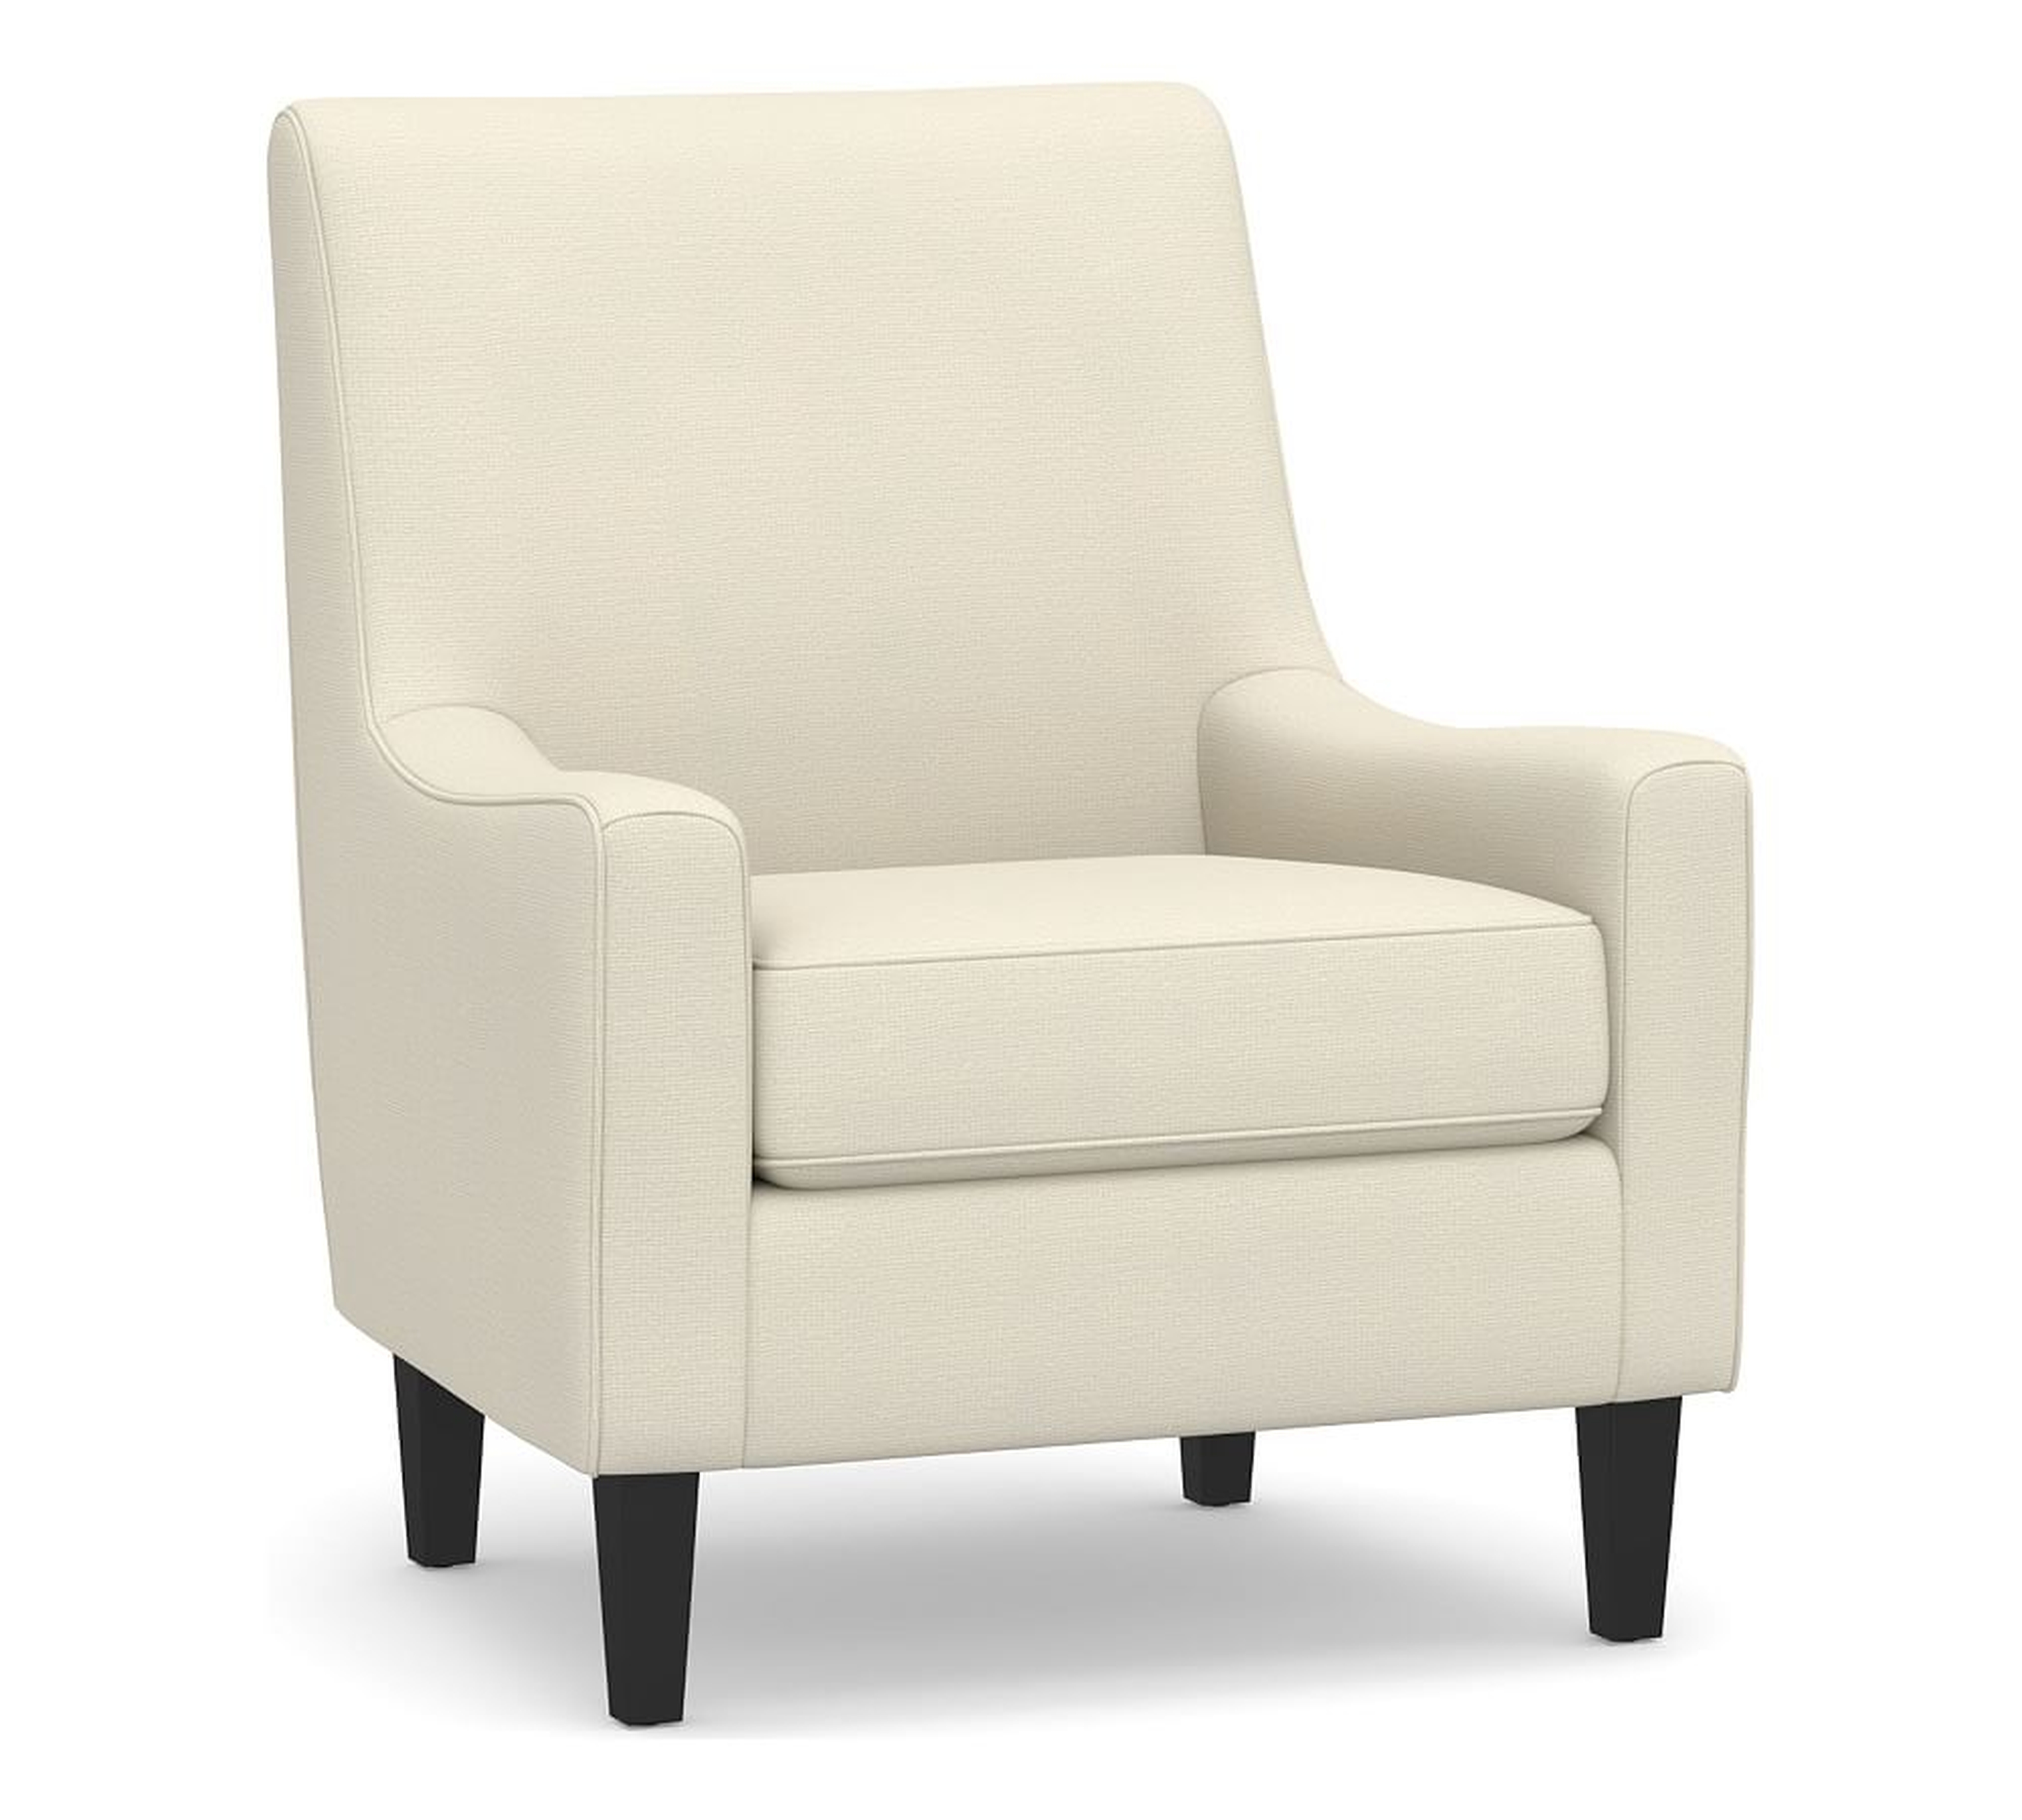 SoMa Isaac Upholstered Armchair, Polyester Wrapped Cushions, Ivory, Park Weave - Pottery Barn